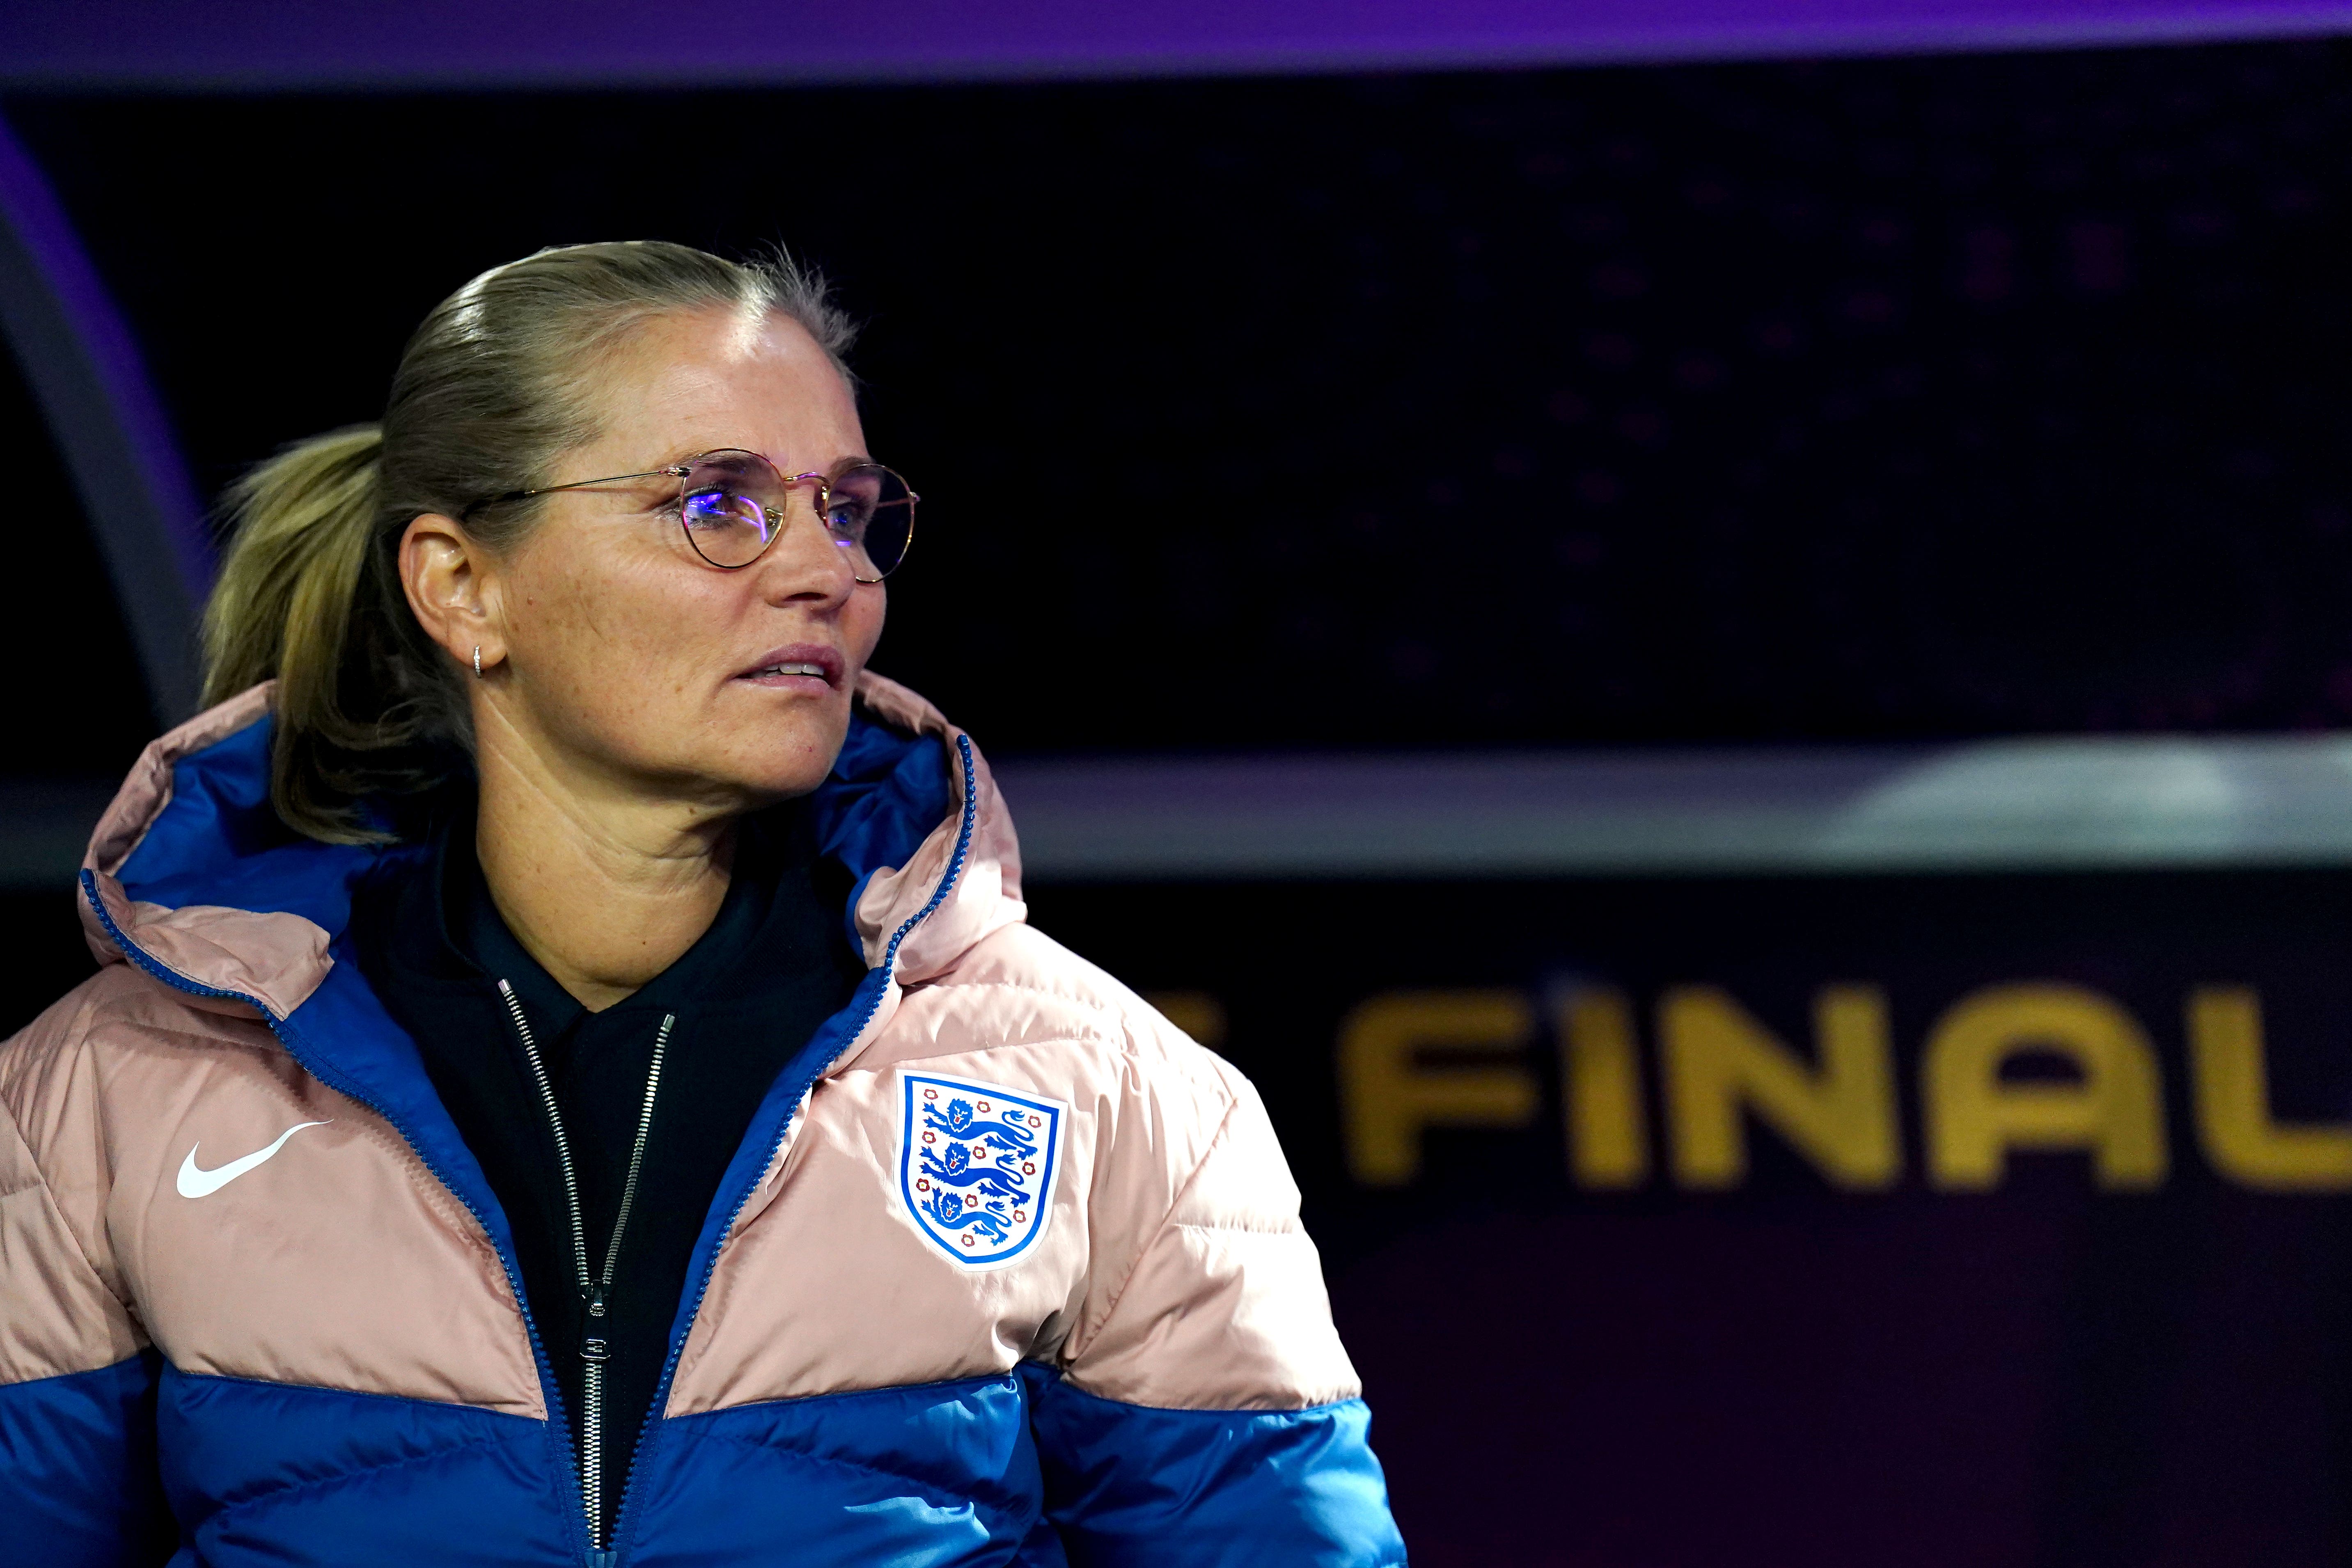 England boss Sarina Wiegman The issues around the Spanish team really hurts me The Independent